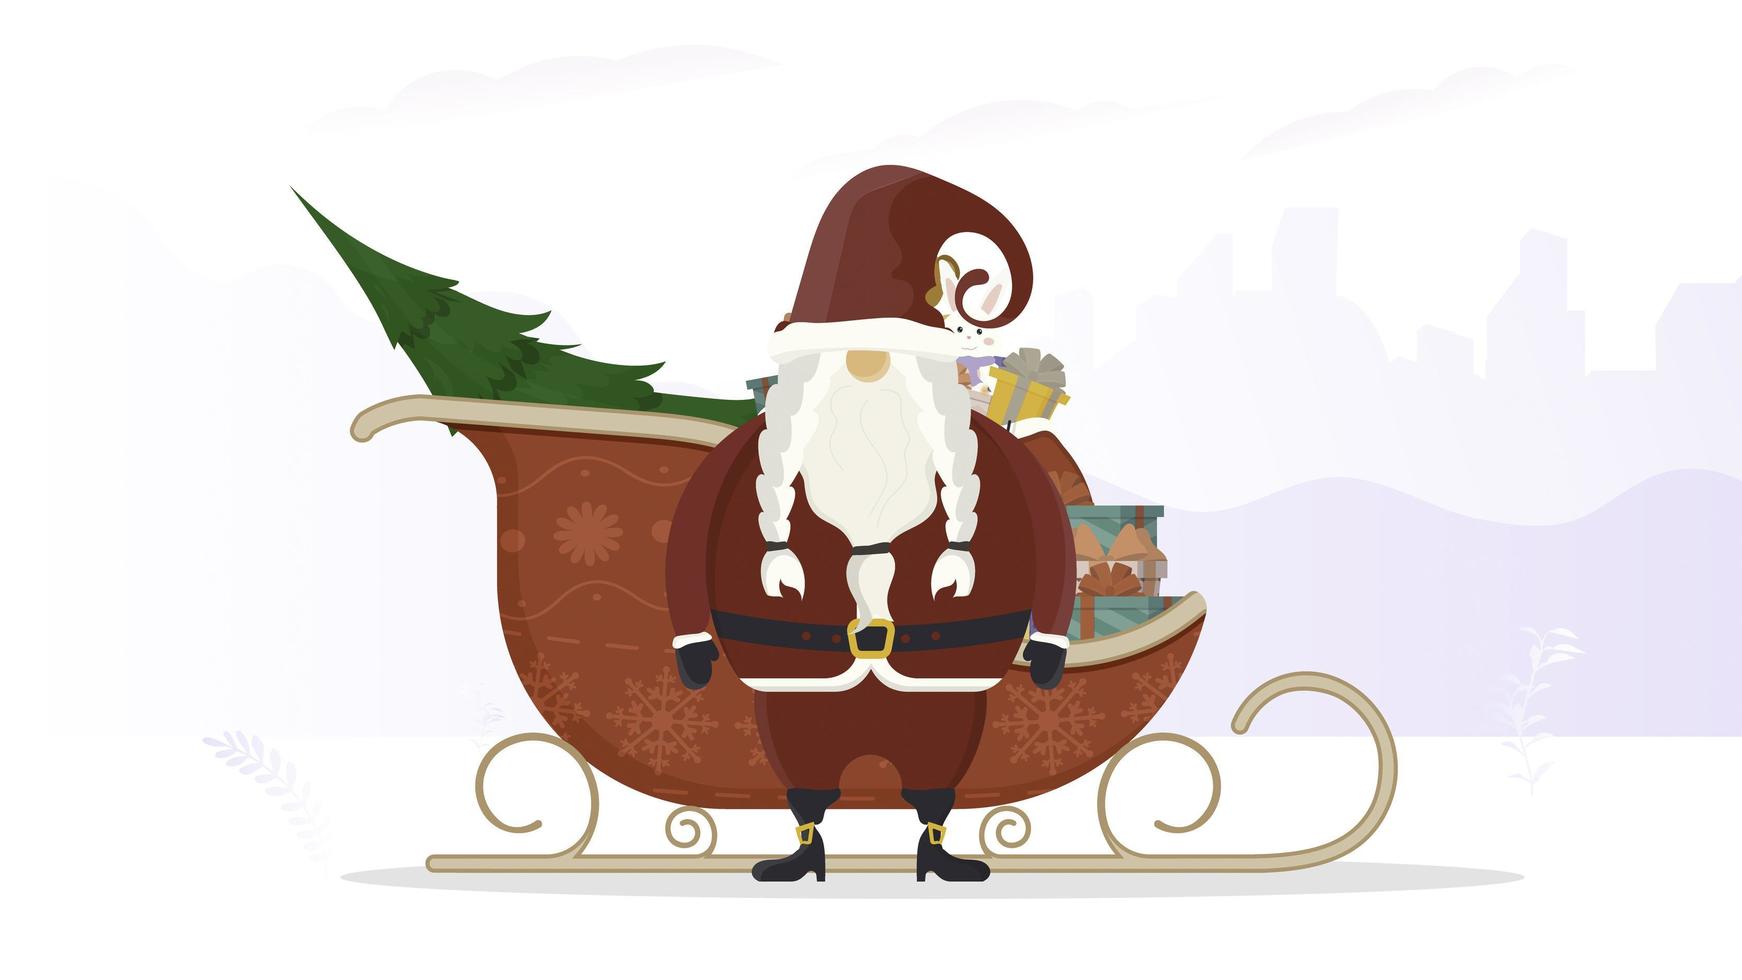 Santa claus with red sleds. Sleds, gifts, new year and christmas concept. Vector illustration, cartoon style design.